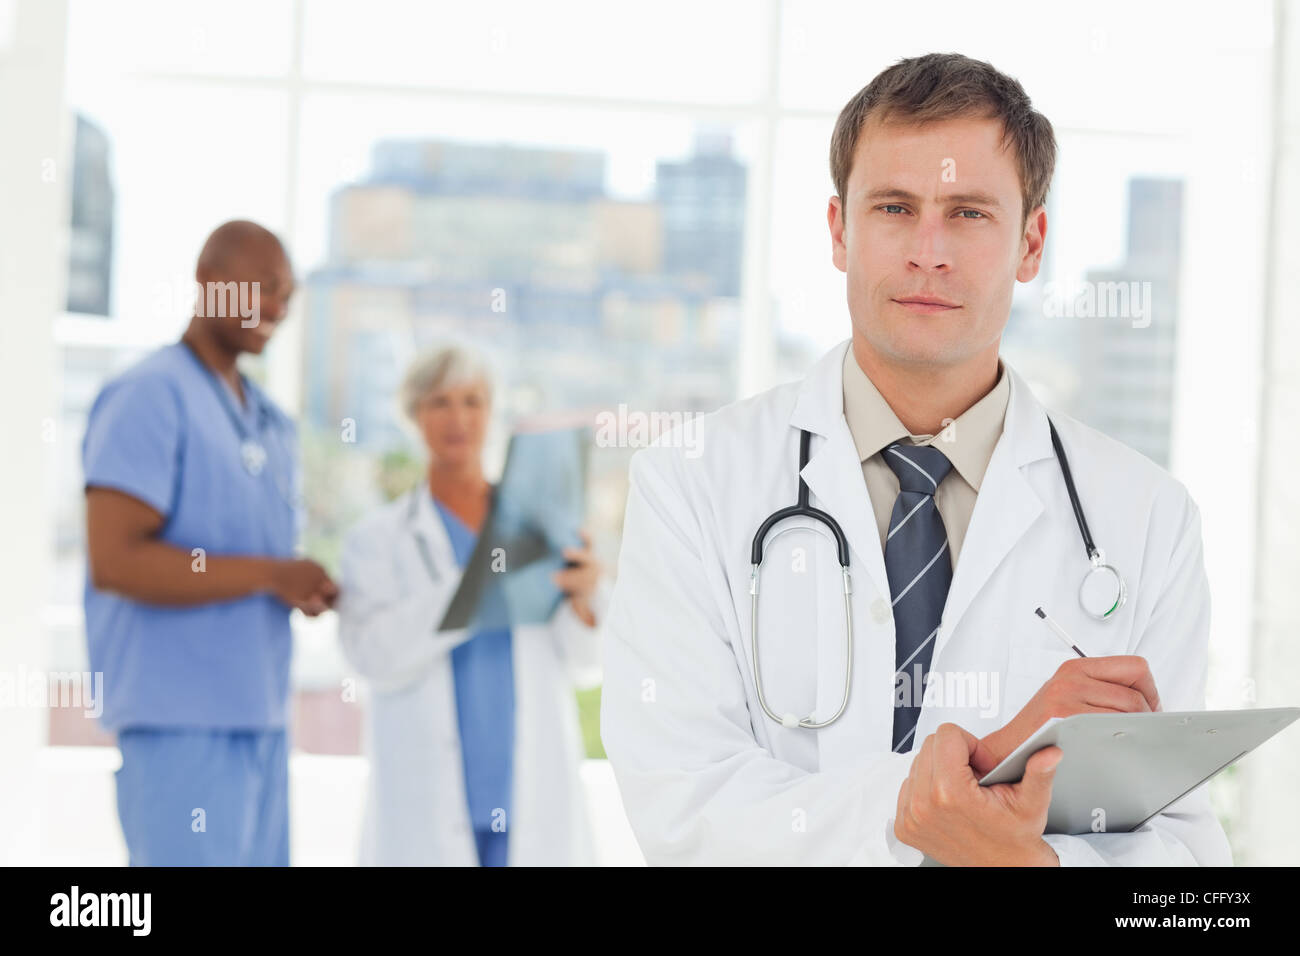 Doctor with clipboard and colleagues behind him Stock Photo